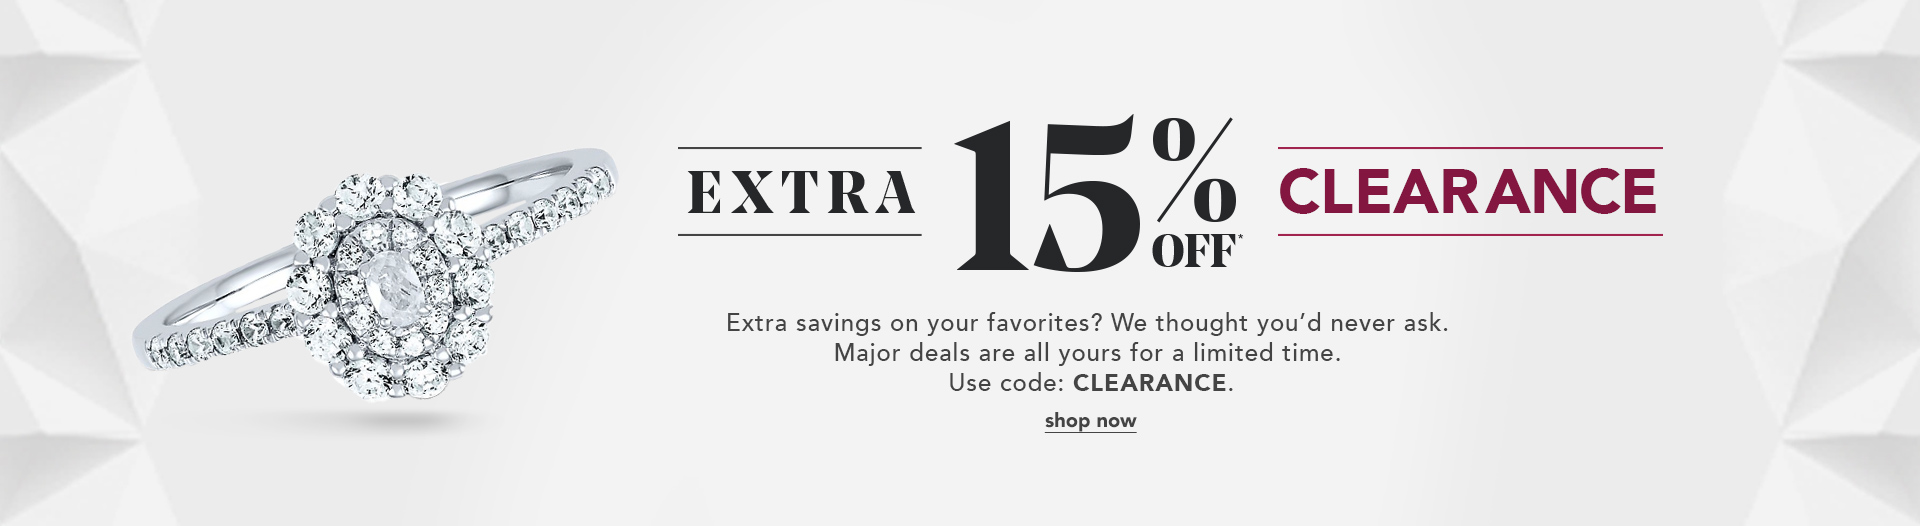 Extra 15% off clearance. Extra savings on your favorites? We thought you'd never ask. Major deals are all yours for a limited time. Use code: CLEARANCE. Shop Now